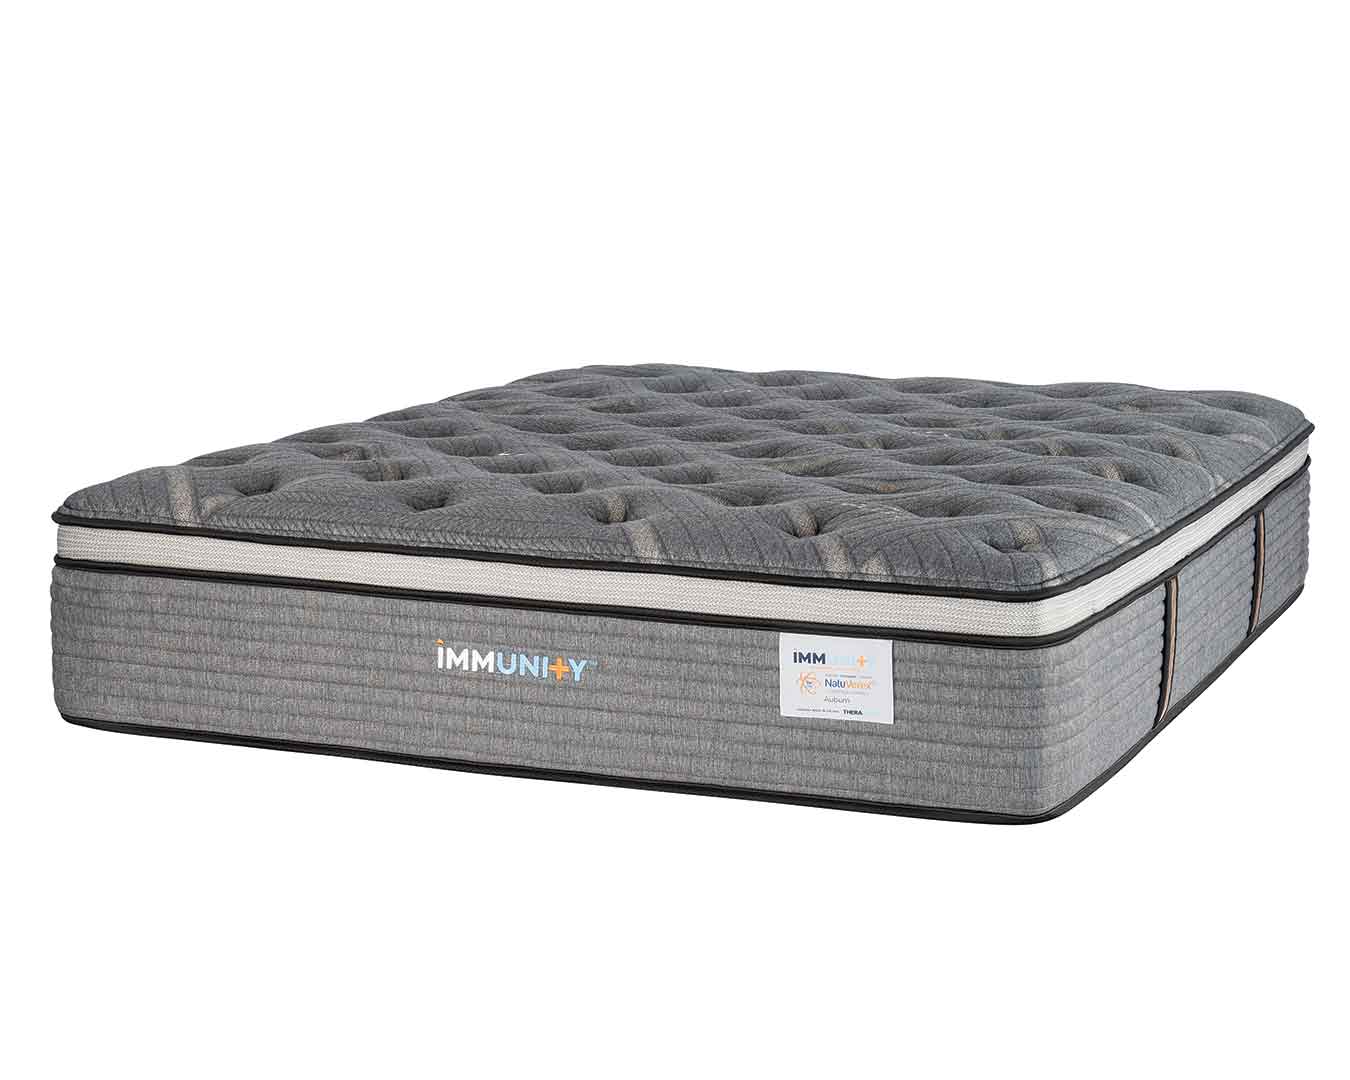 Immunity Auburn copper mattress at an angle with a white background.